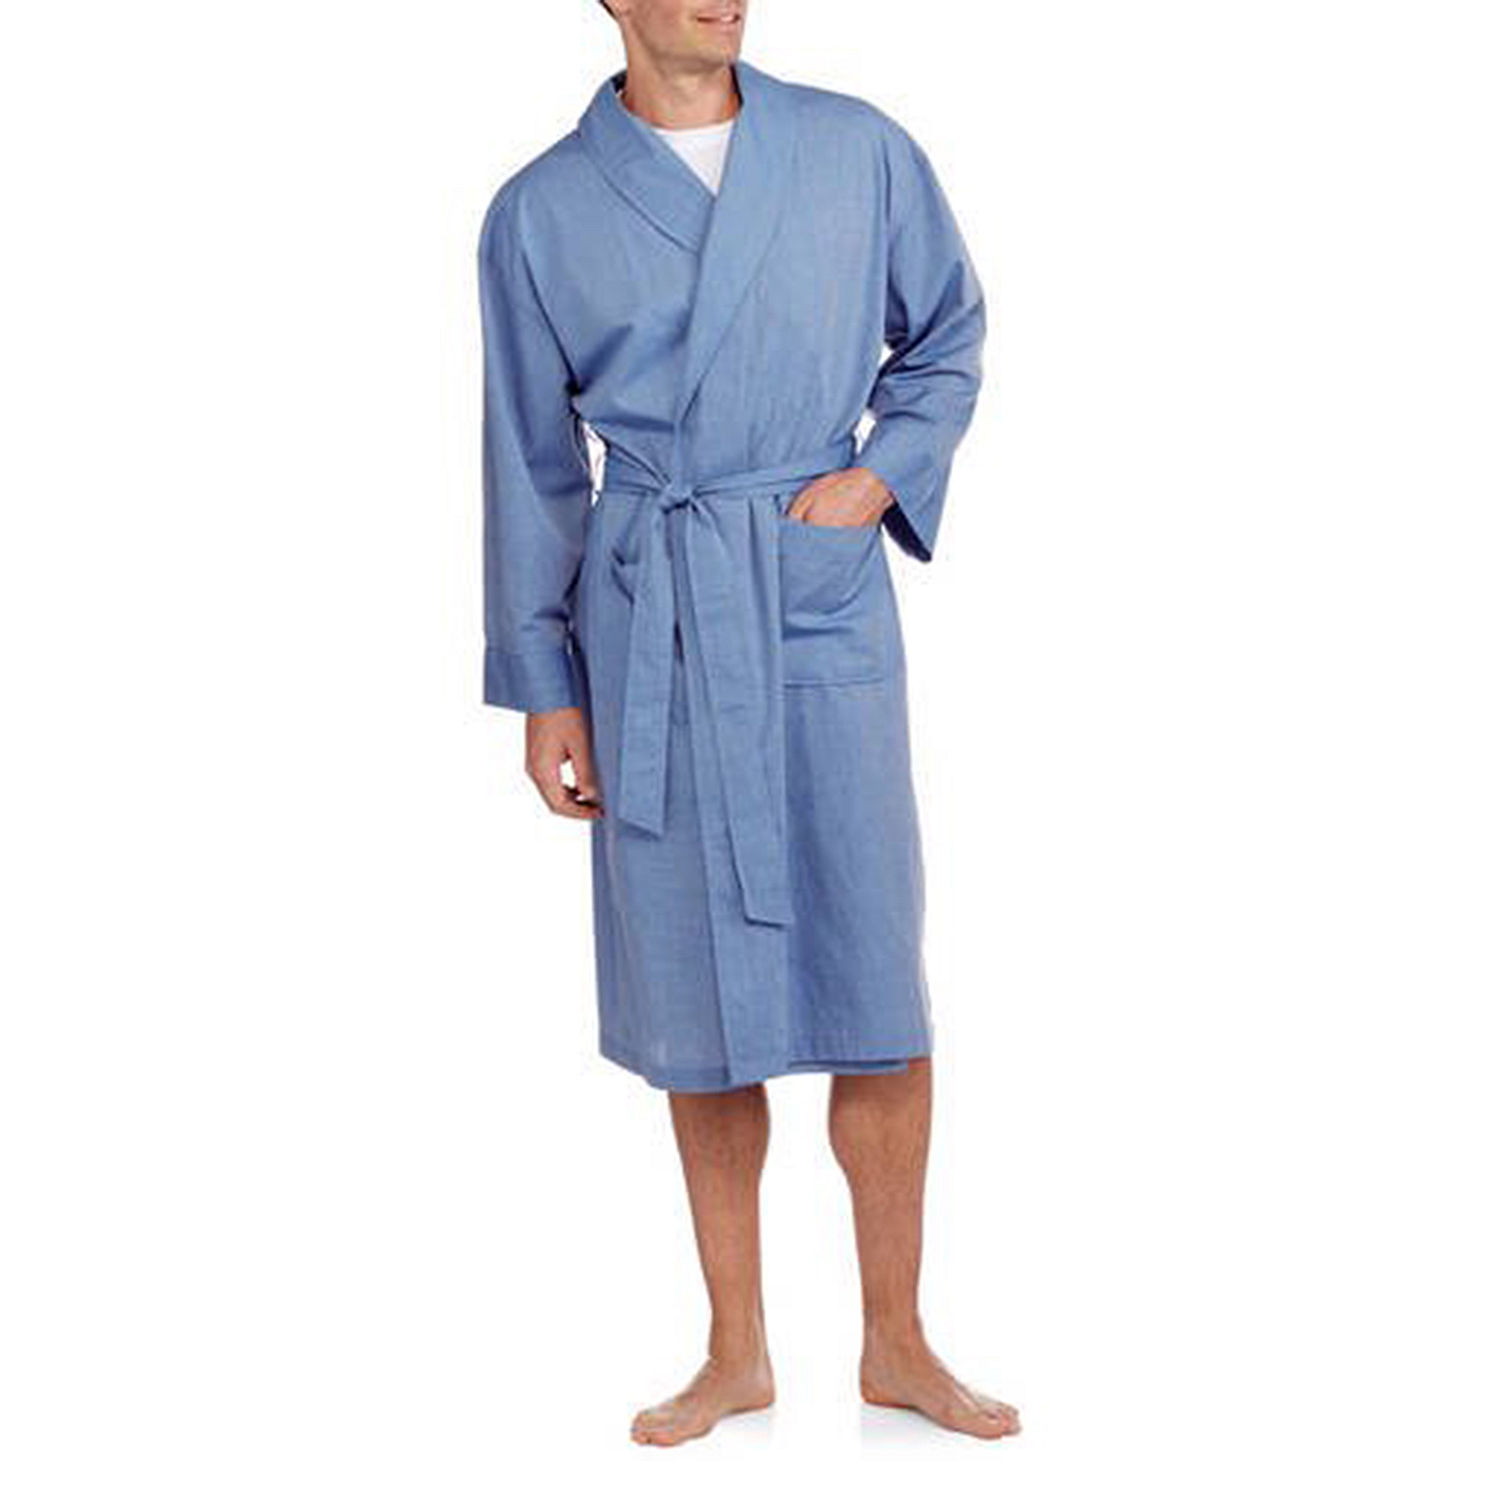 Hanes Mens Long Sleeve Mid Length Robe - JCPenney